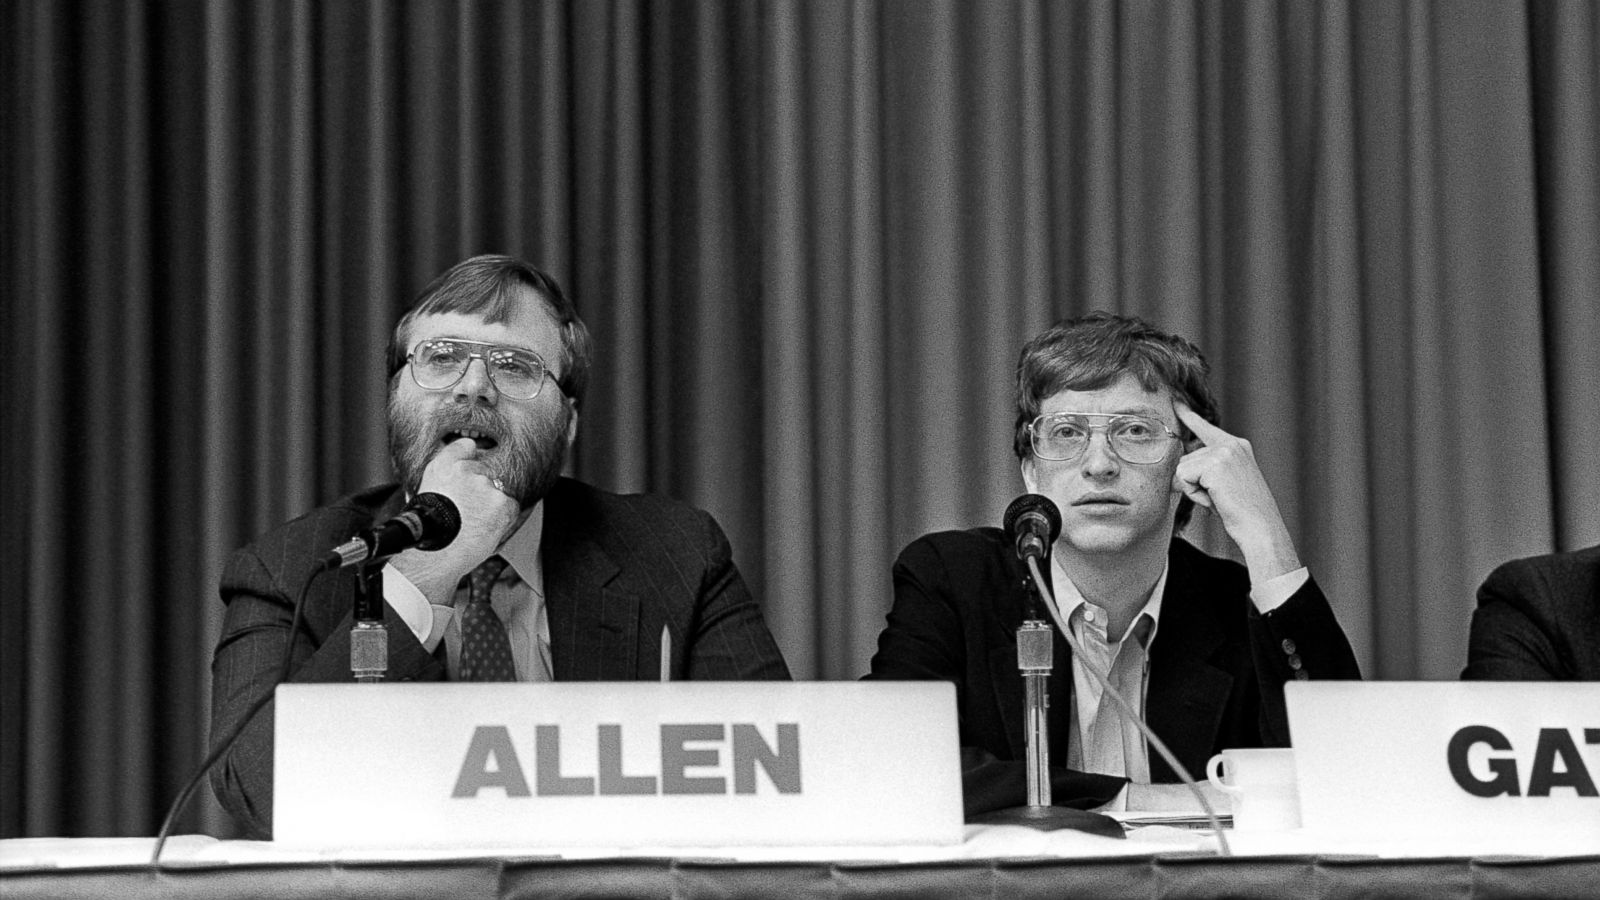 Image of Bill Gates and Paul Allen